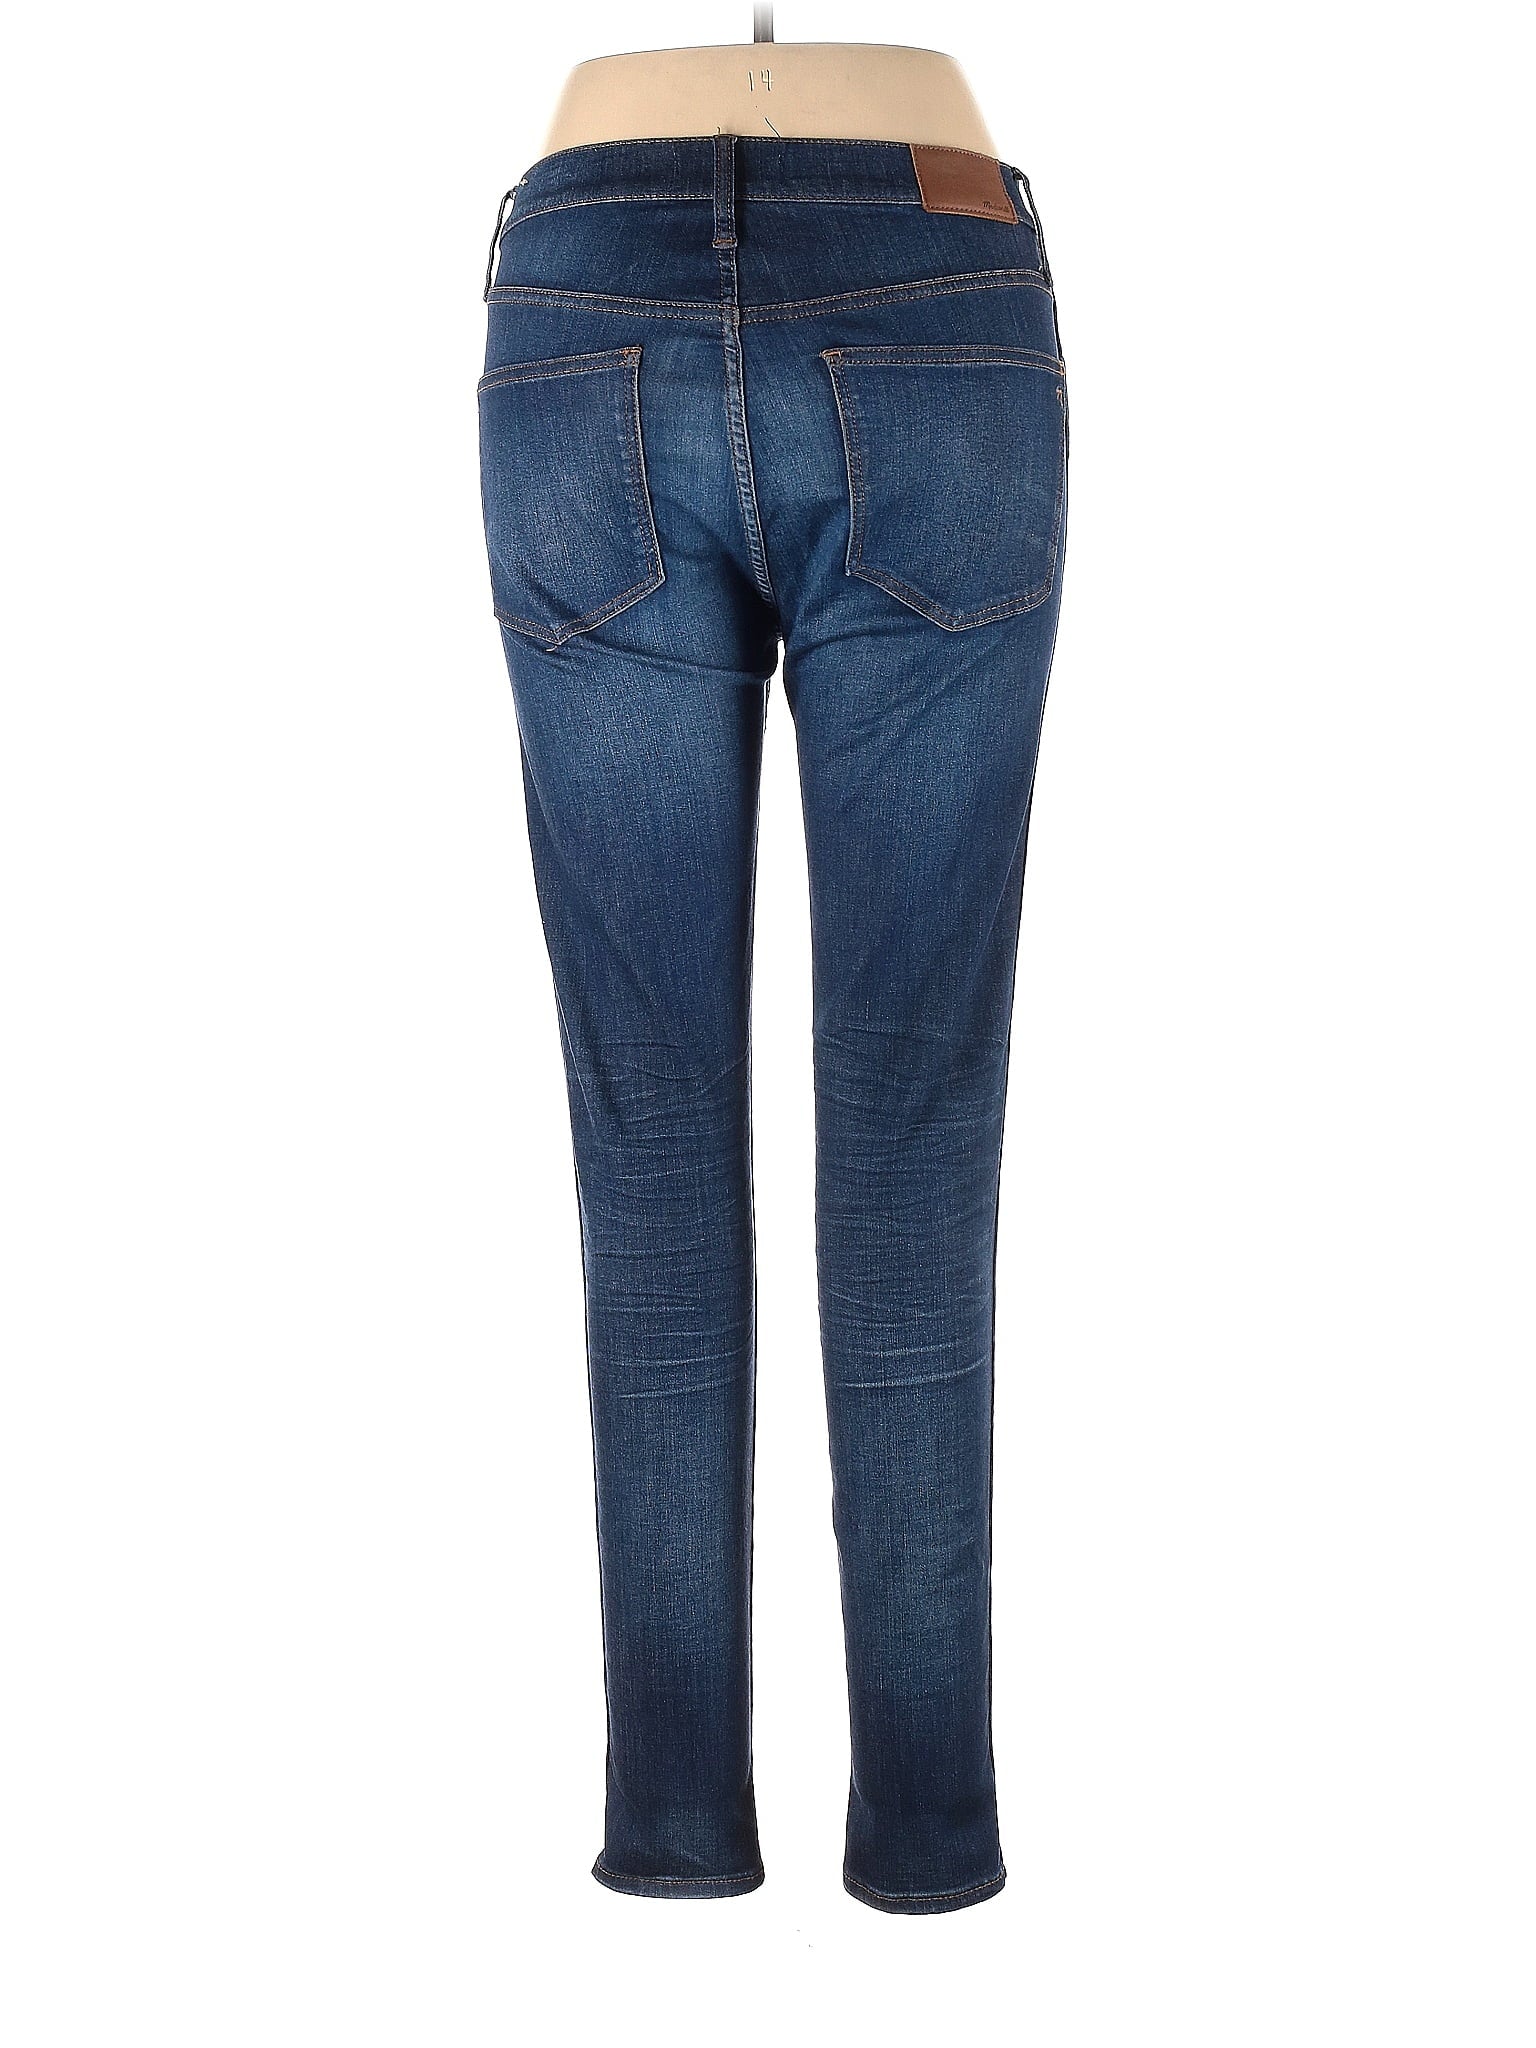 Mid-Rise Skinny Jeans in Dark Wash waist size - 30 T